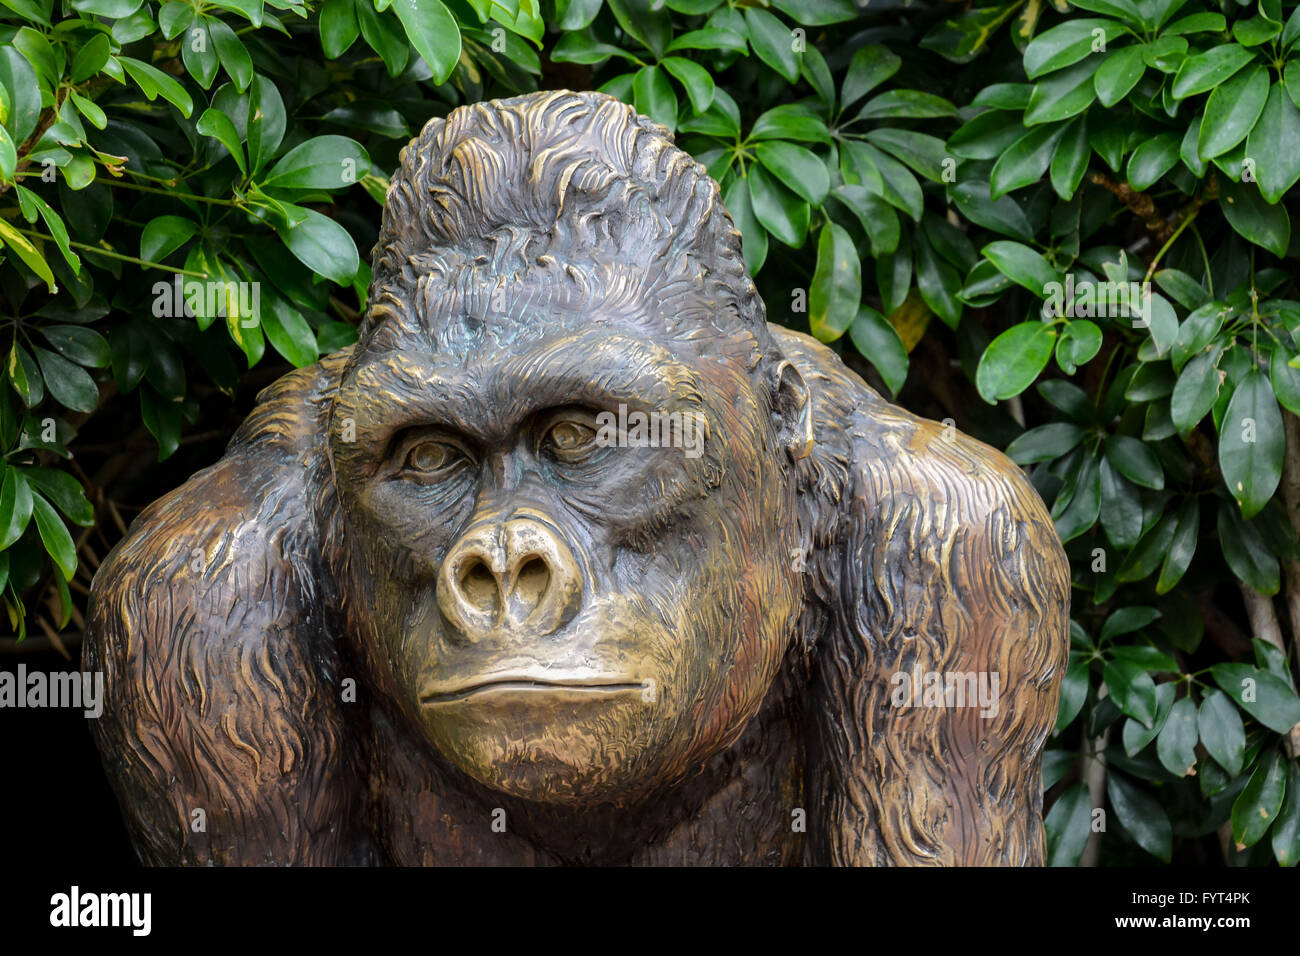 Statue of Strong Gorilla Stock Photo, Royalty Free Image: 103178171 - Alamy